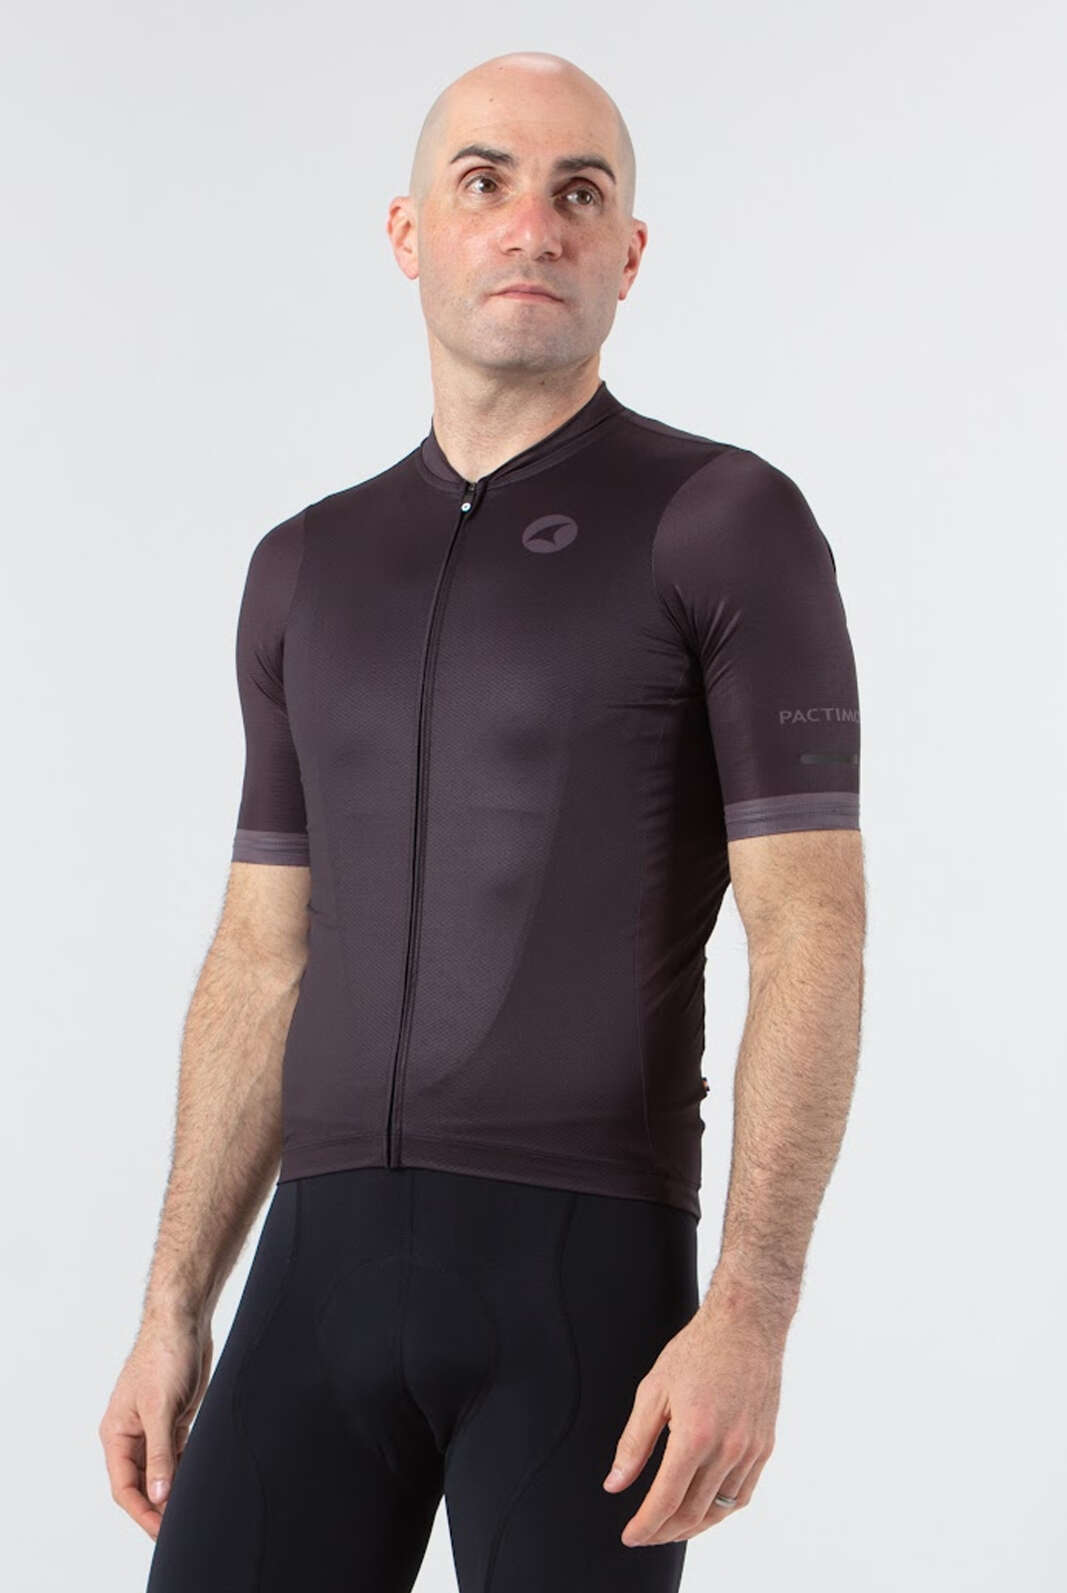 Men's Black Aero Summer Cycling Jersey - Ascent Front View